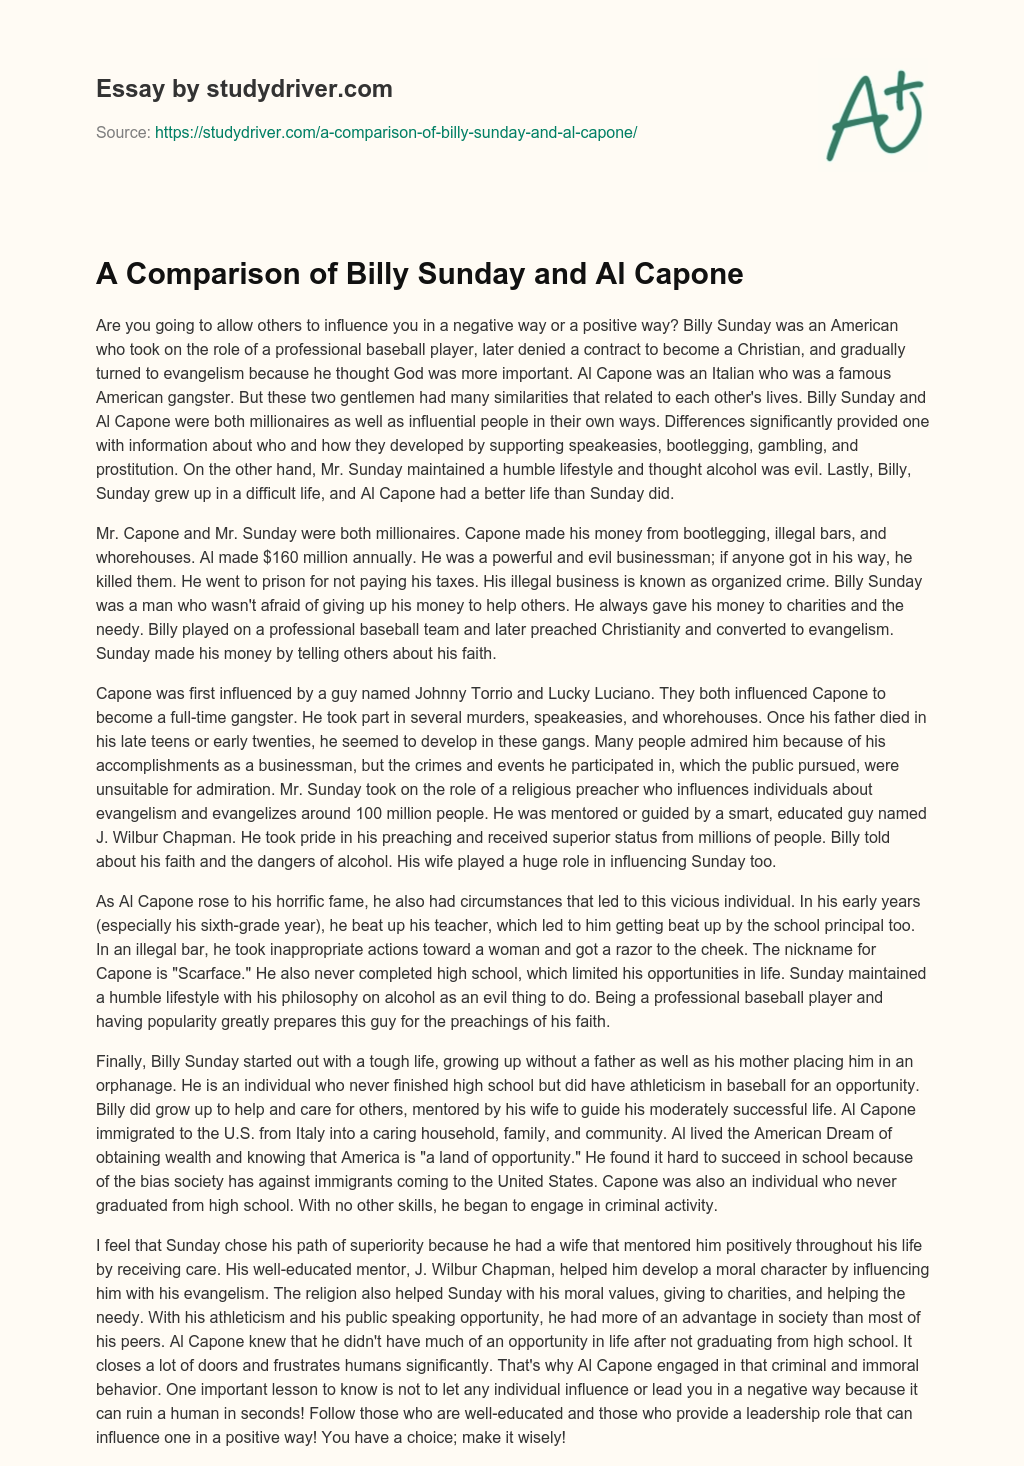 A Comparison of Billy Sunday and Al Capone essay